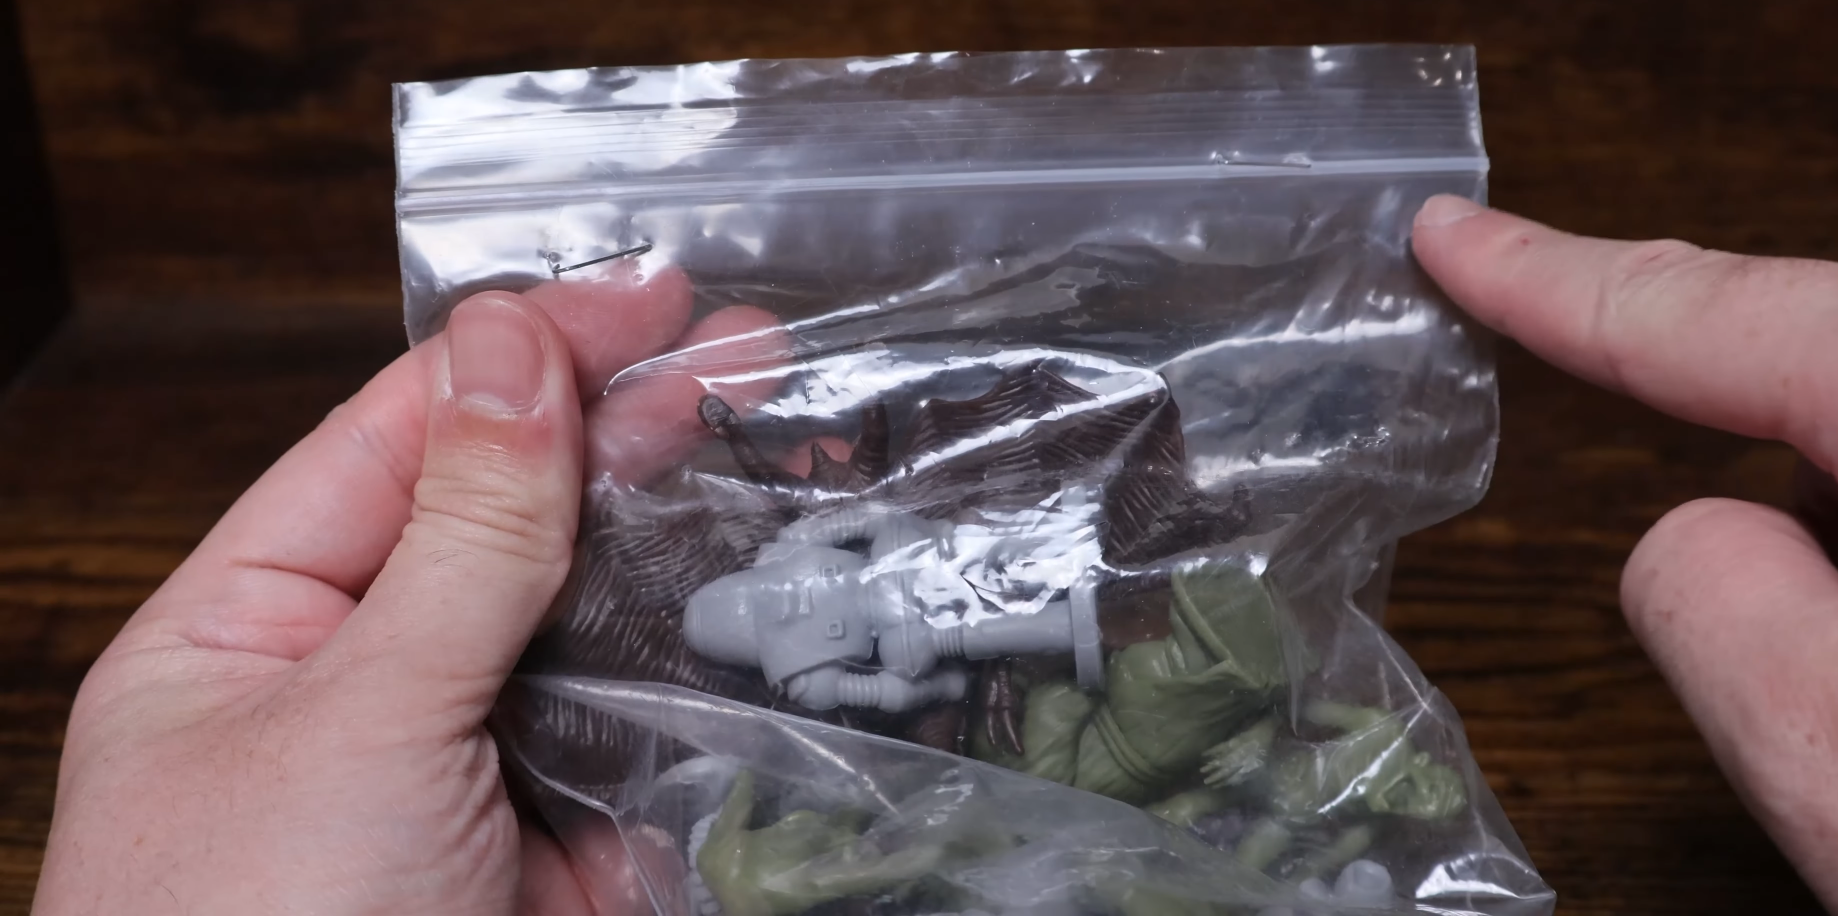 The Emce Toys army men come in zip lock bags!